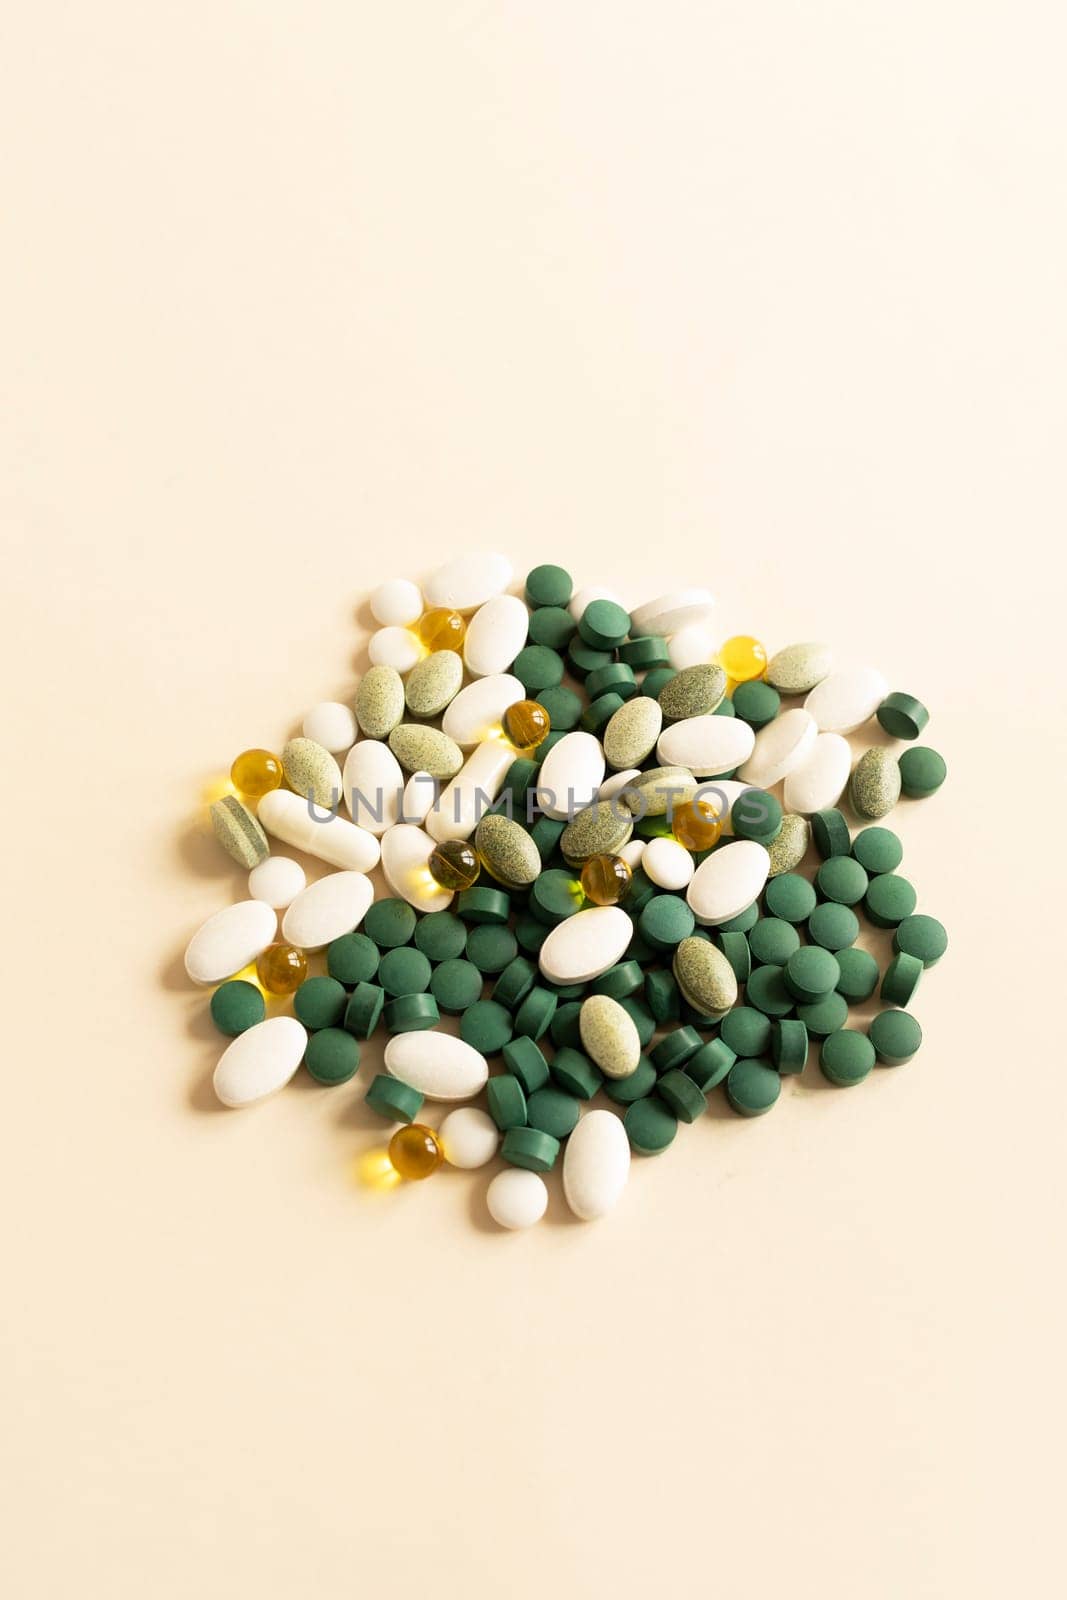 Assorted Pile of Colorful Pills, Green White Yellow, Beige Tablets, Capsules, Medical Supplement on Beige Background. Pharmaceutical concept. Copy Space For Text. Vertical Plane by netatsi